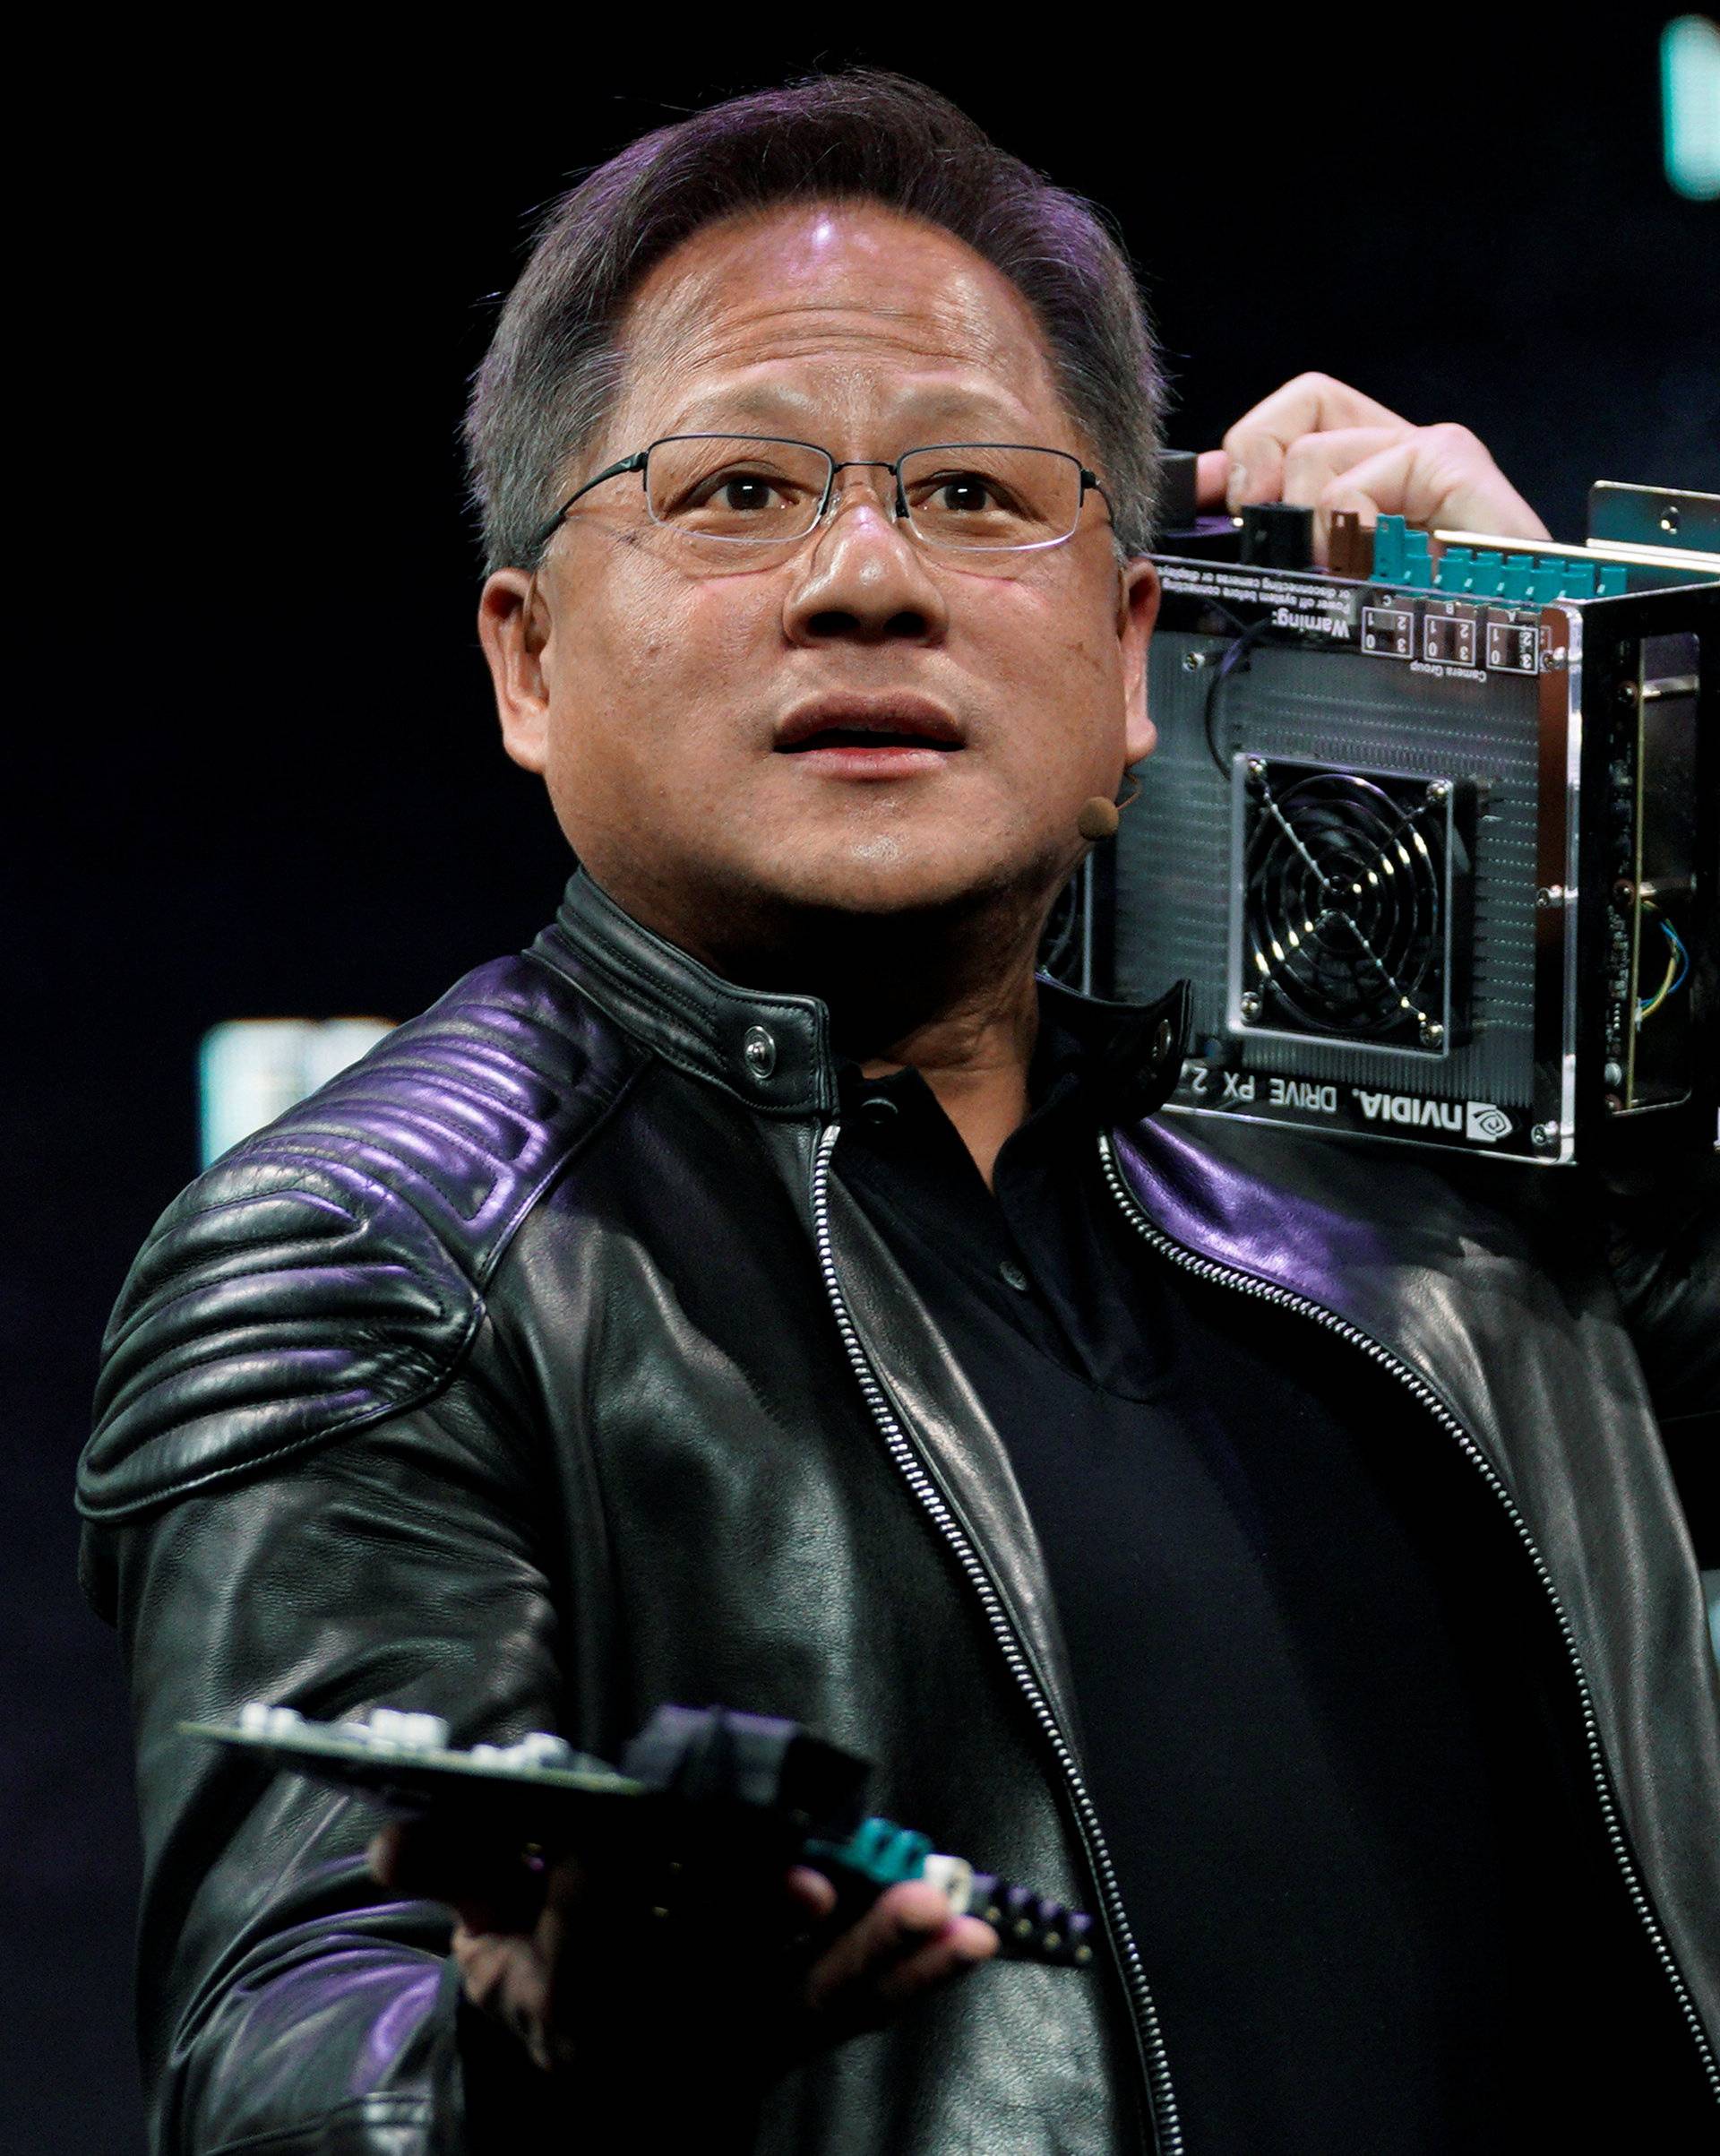 Jensen Huang, CEO of Nvidia, shows the old and new computers for autonomous vehicles at his keynote address at CES in Las Vegas